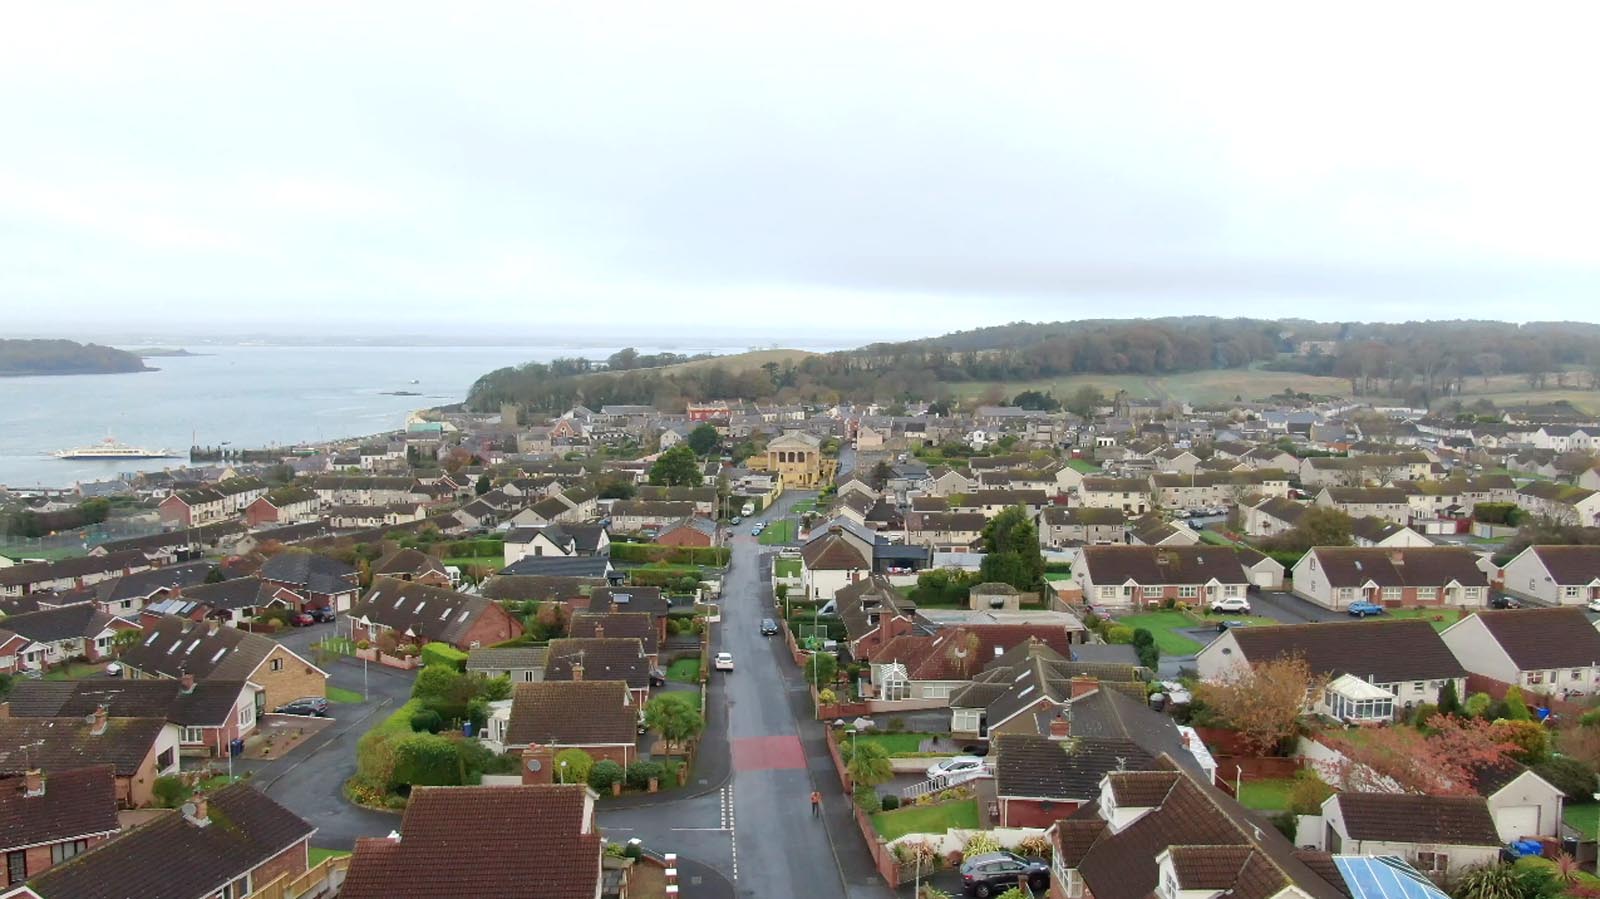 Aerial drone photography and video production services Dublin and Ireland portfolio - screenshot 4 of Portico Ards video